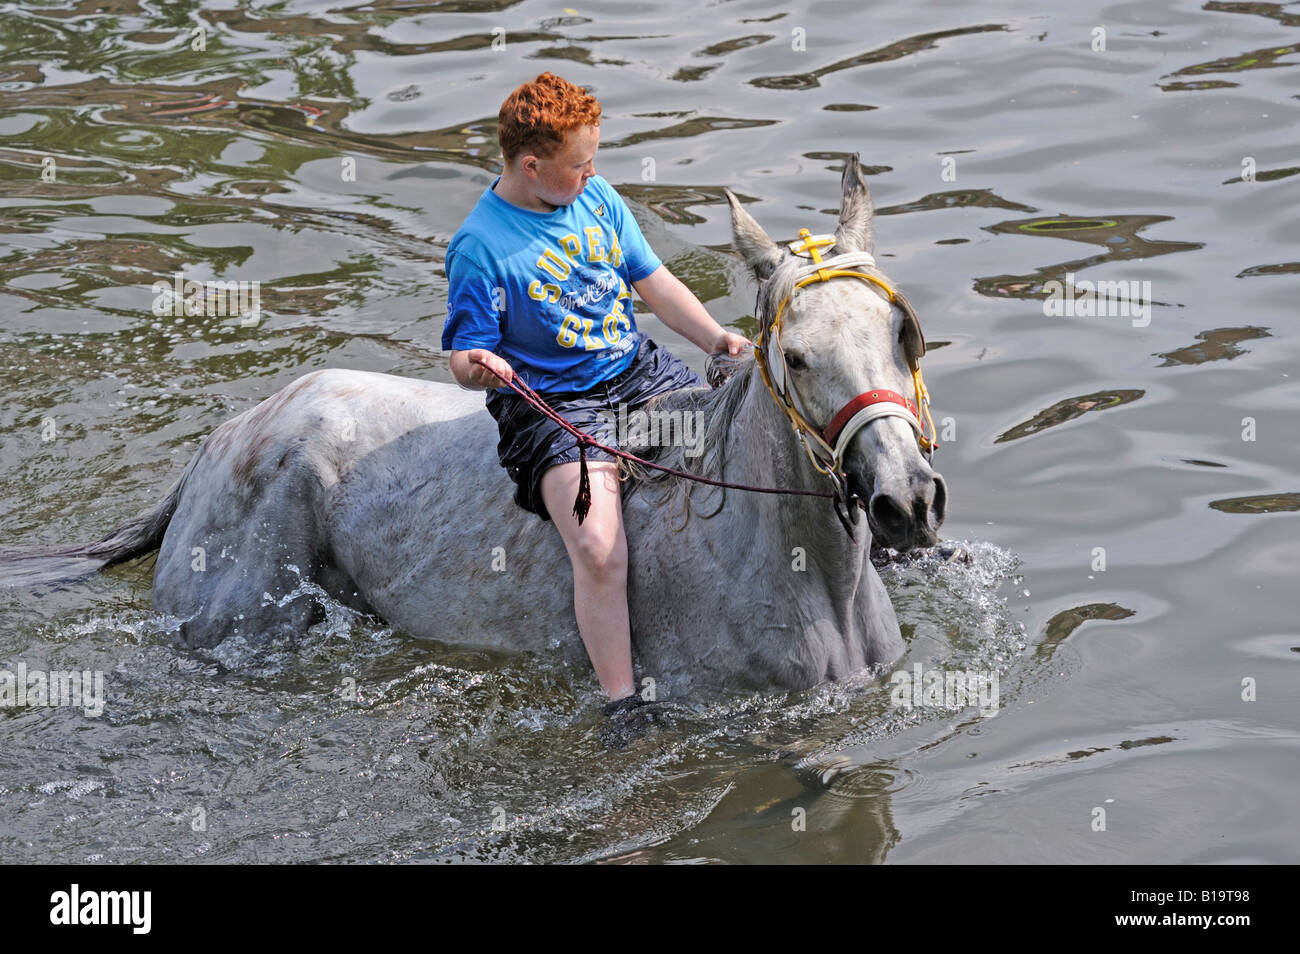 Gypsy traveller boy riding a horse in the River Eden. Appleby Horse Fair. Appleby-in-Westmorland, Cumbria, England. Stock Photo